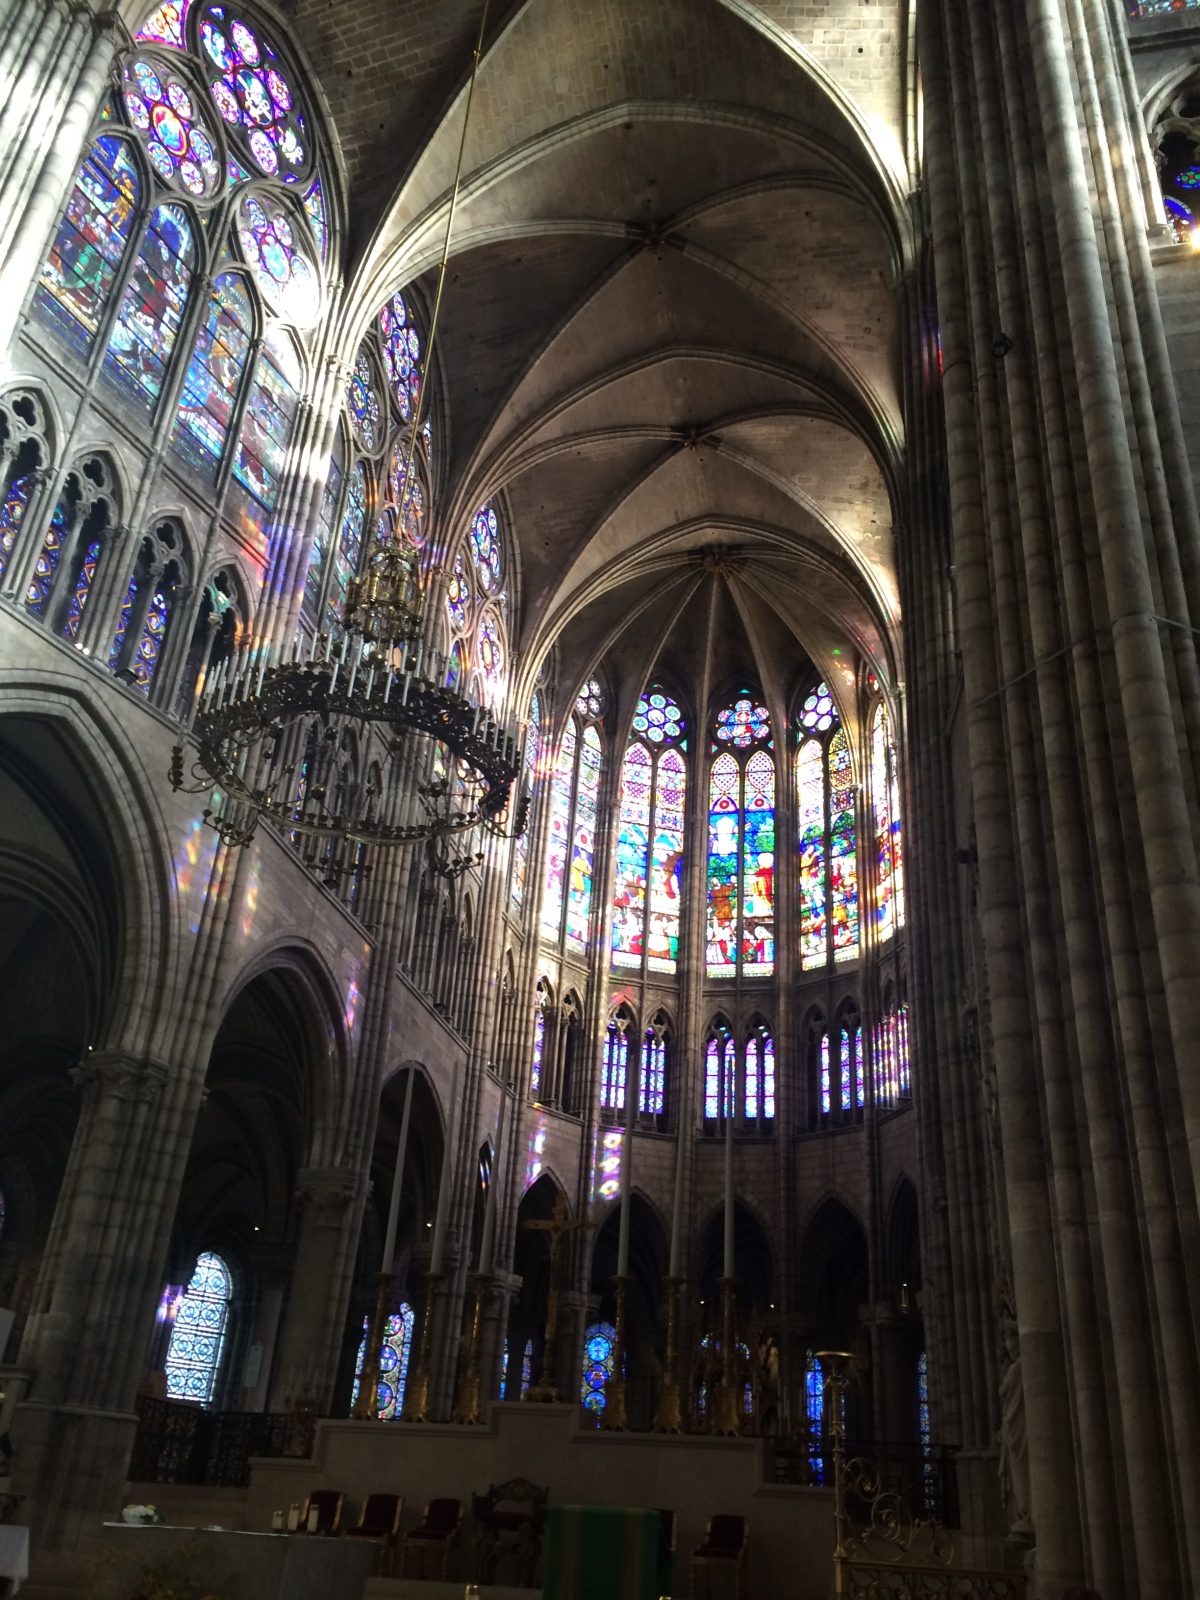 Exploring the Basilica of Saint-Denis in Paris while reading “Pillars of the Earth” by Ken Follet